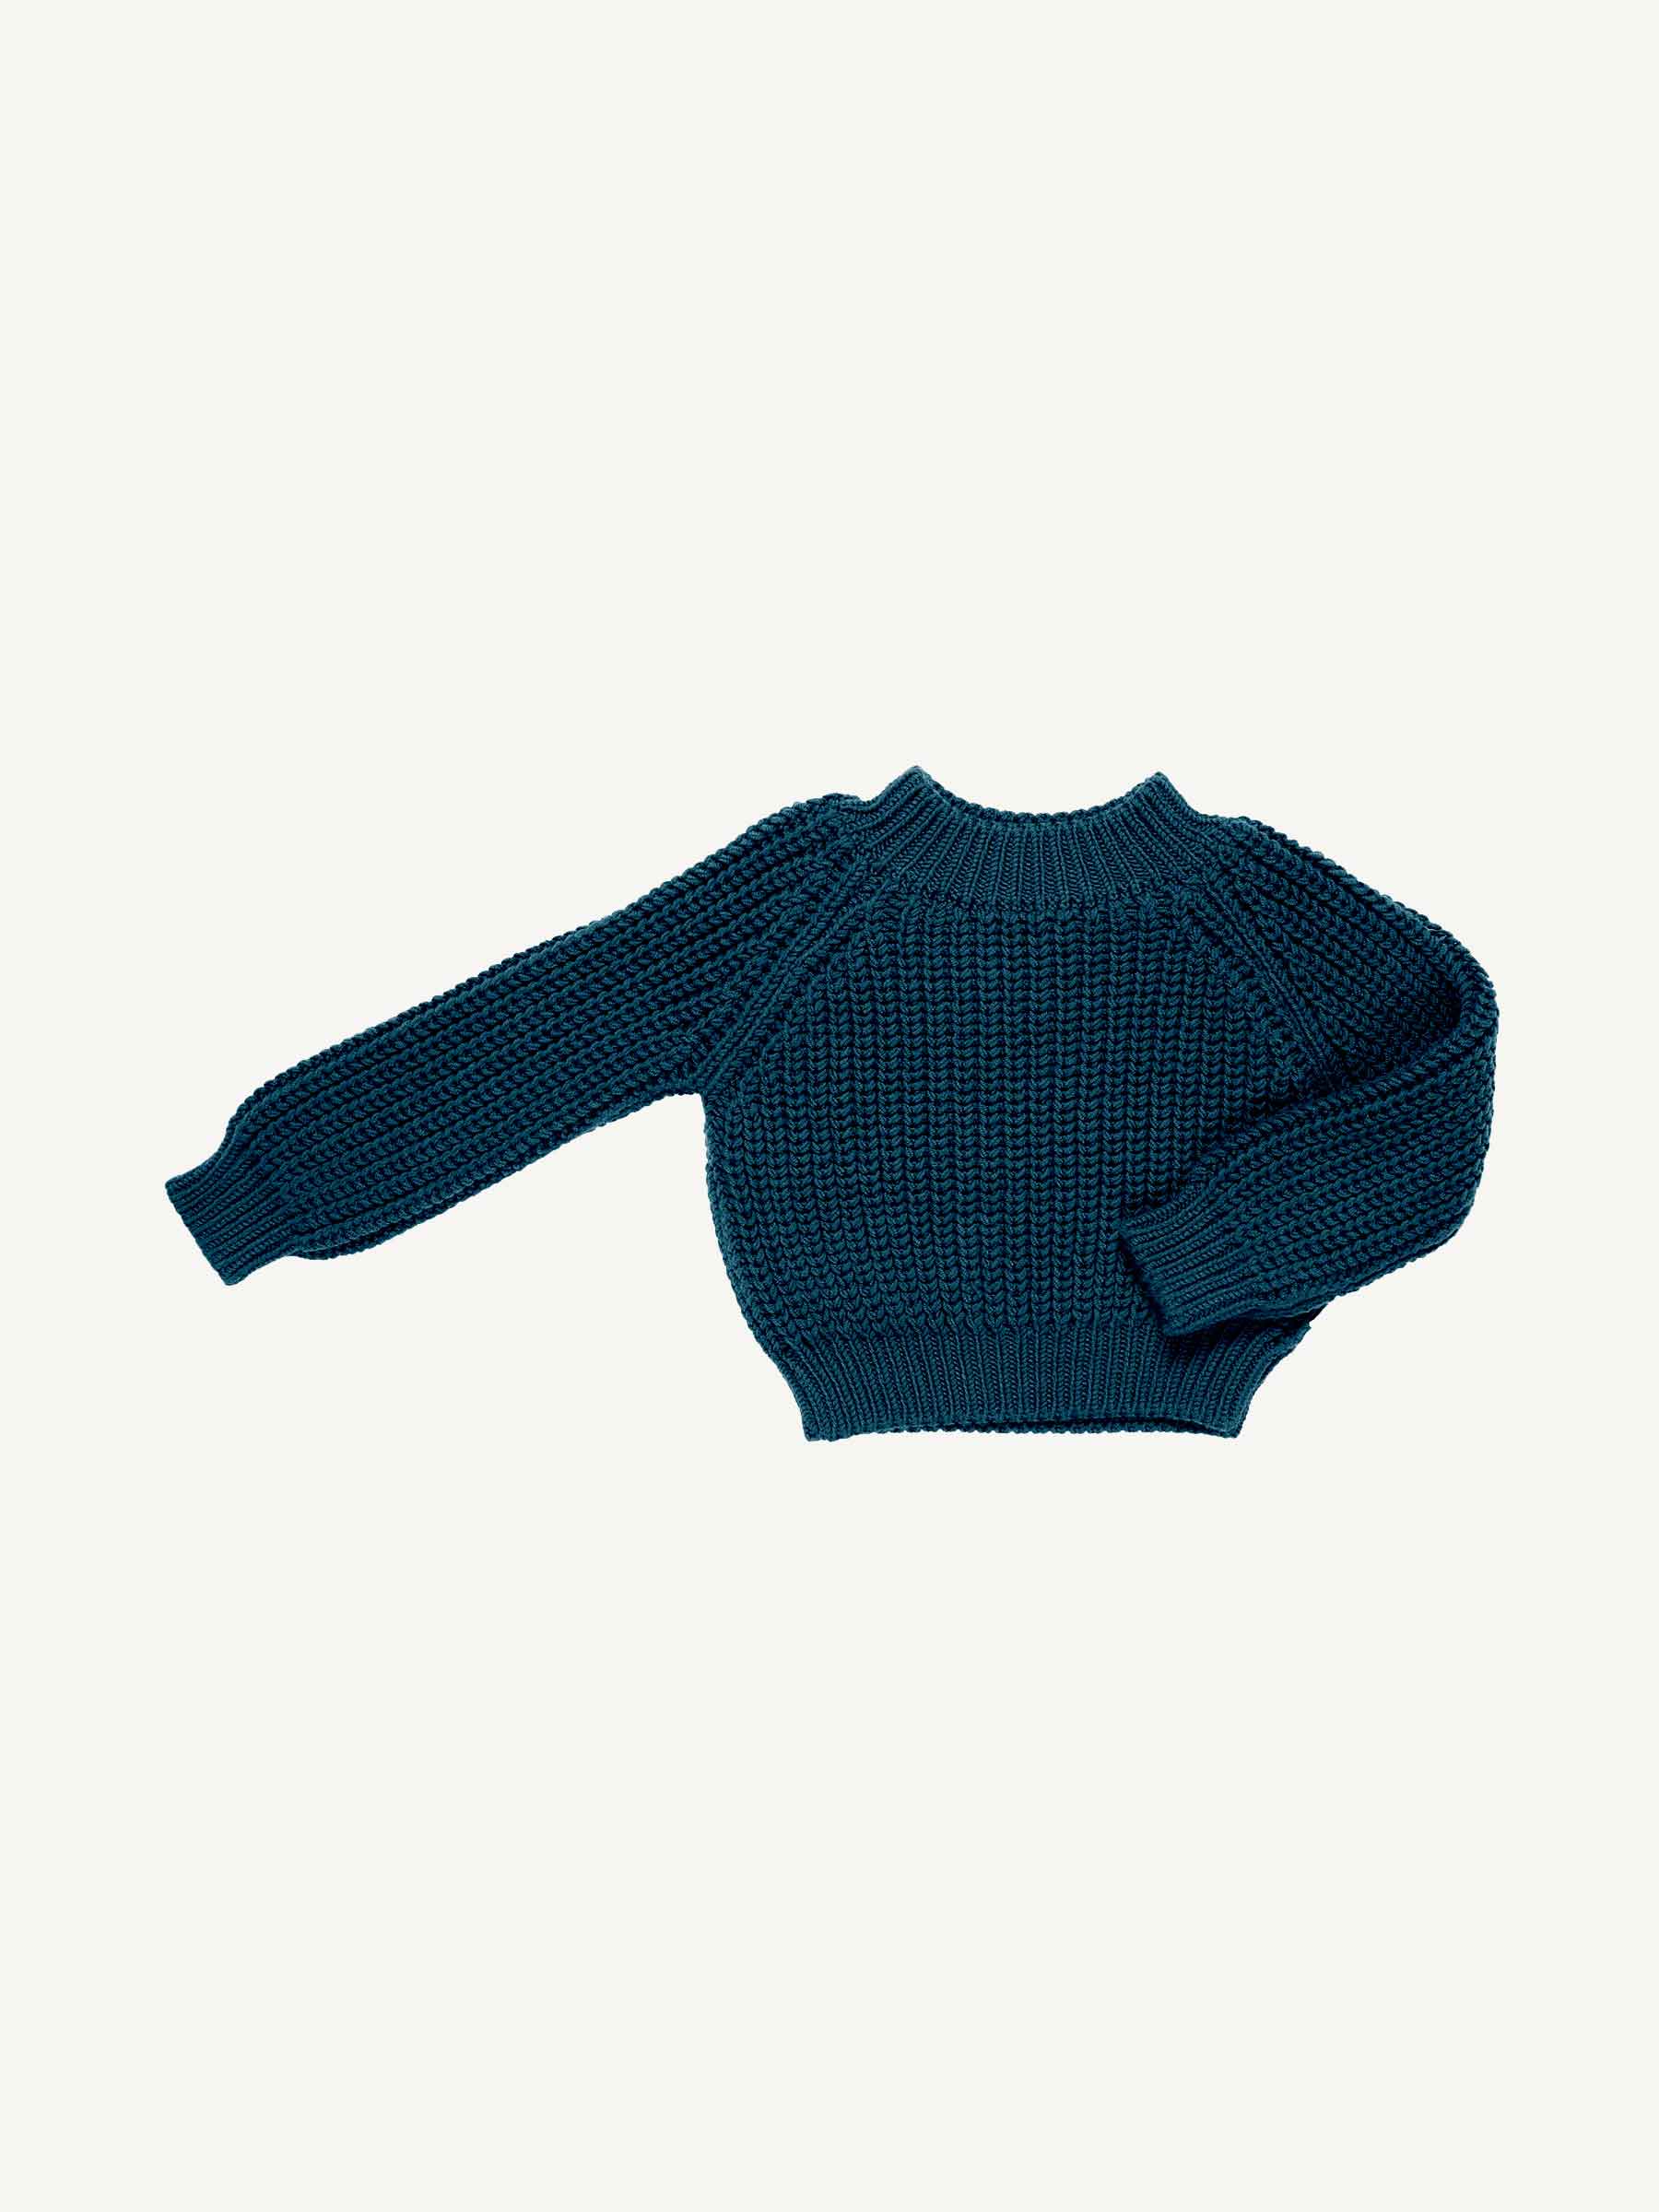 Basic open knit (unisex) sweater pattern coming very very soon